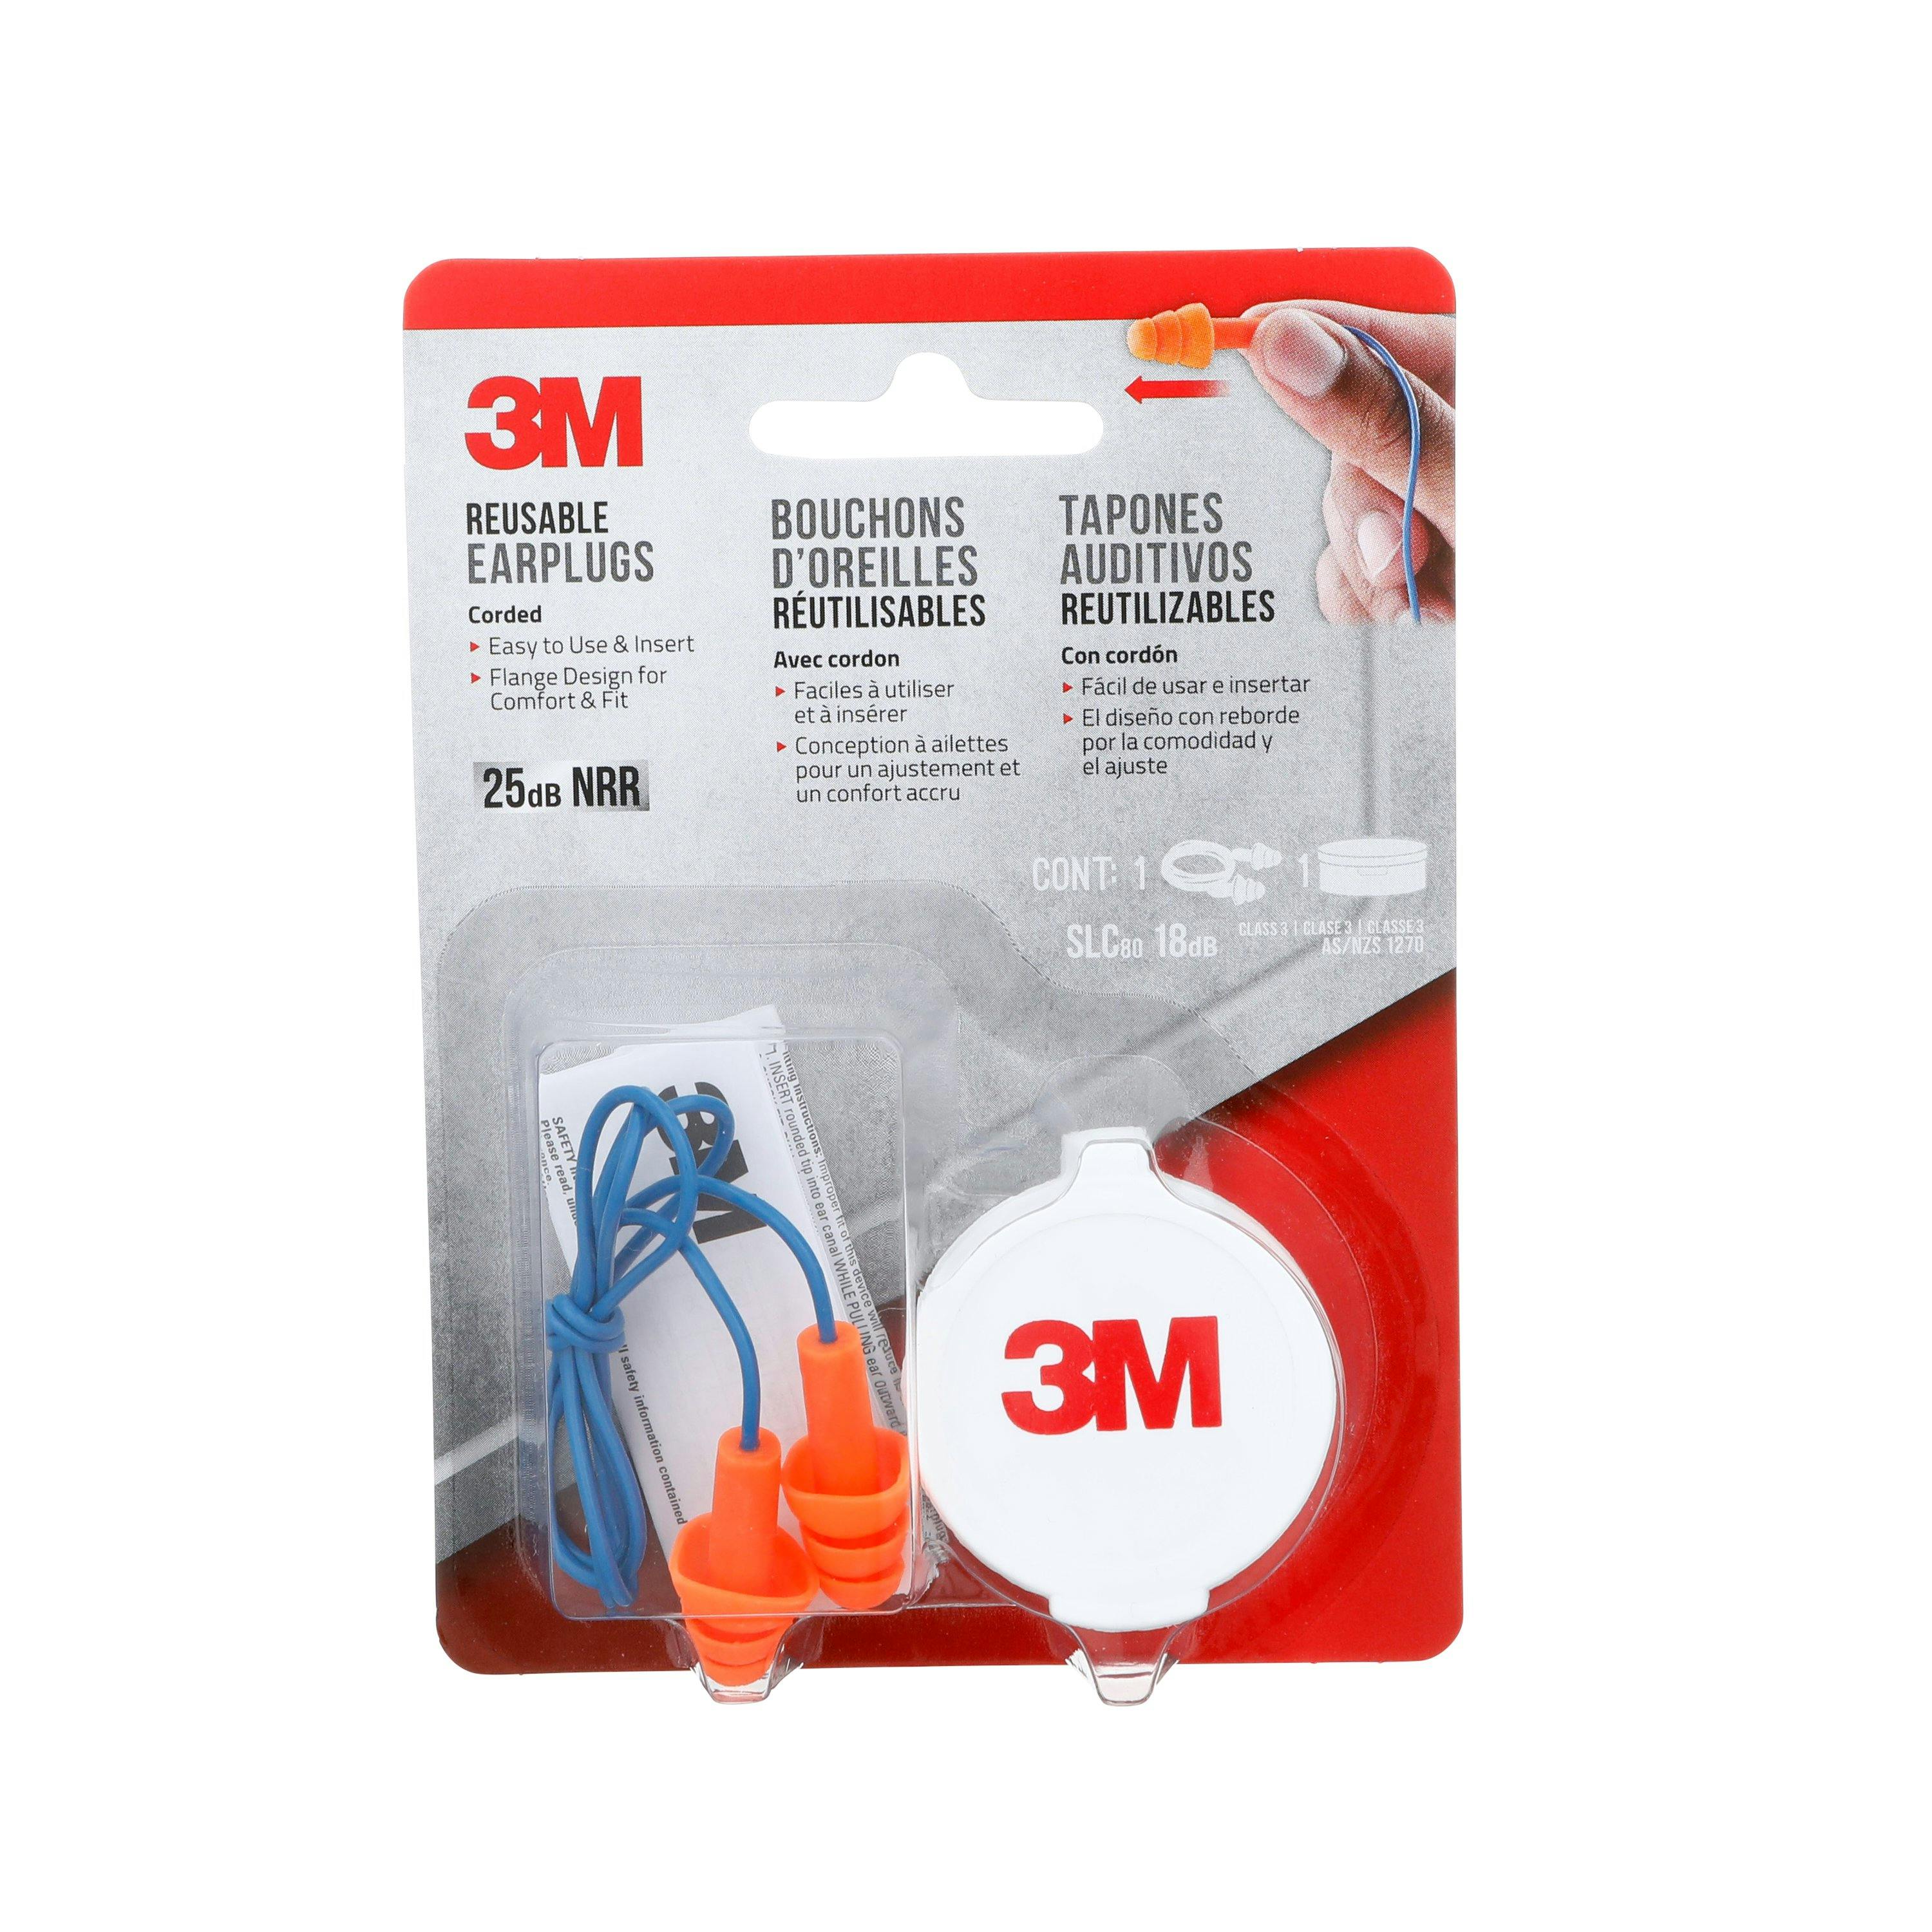 3M™ Corded Reusable Earplugs, 90586H1-DC, 1 pair with case/pack, 10